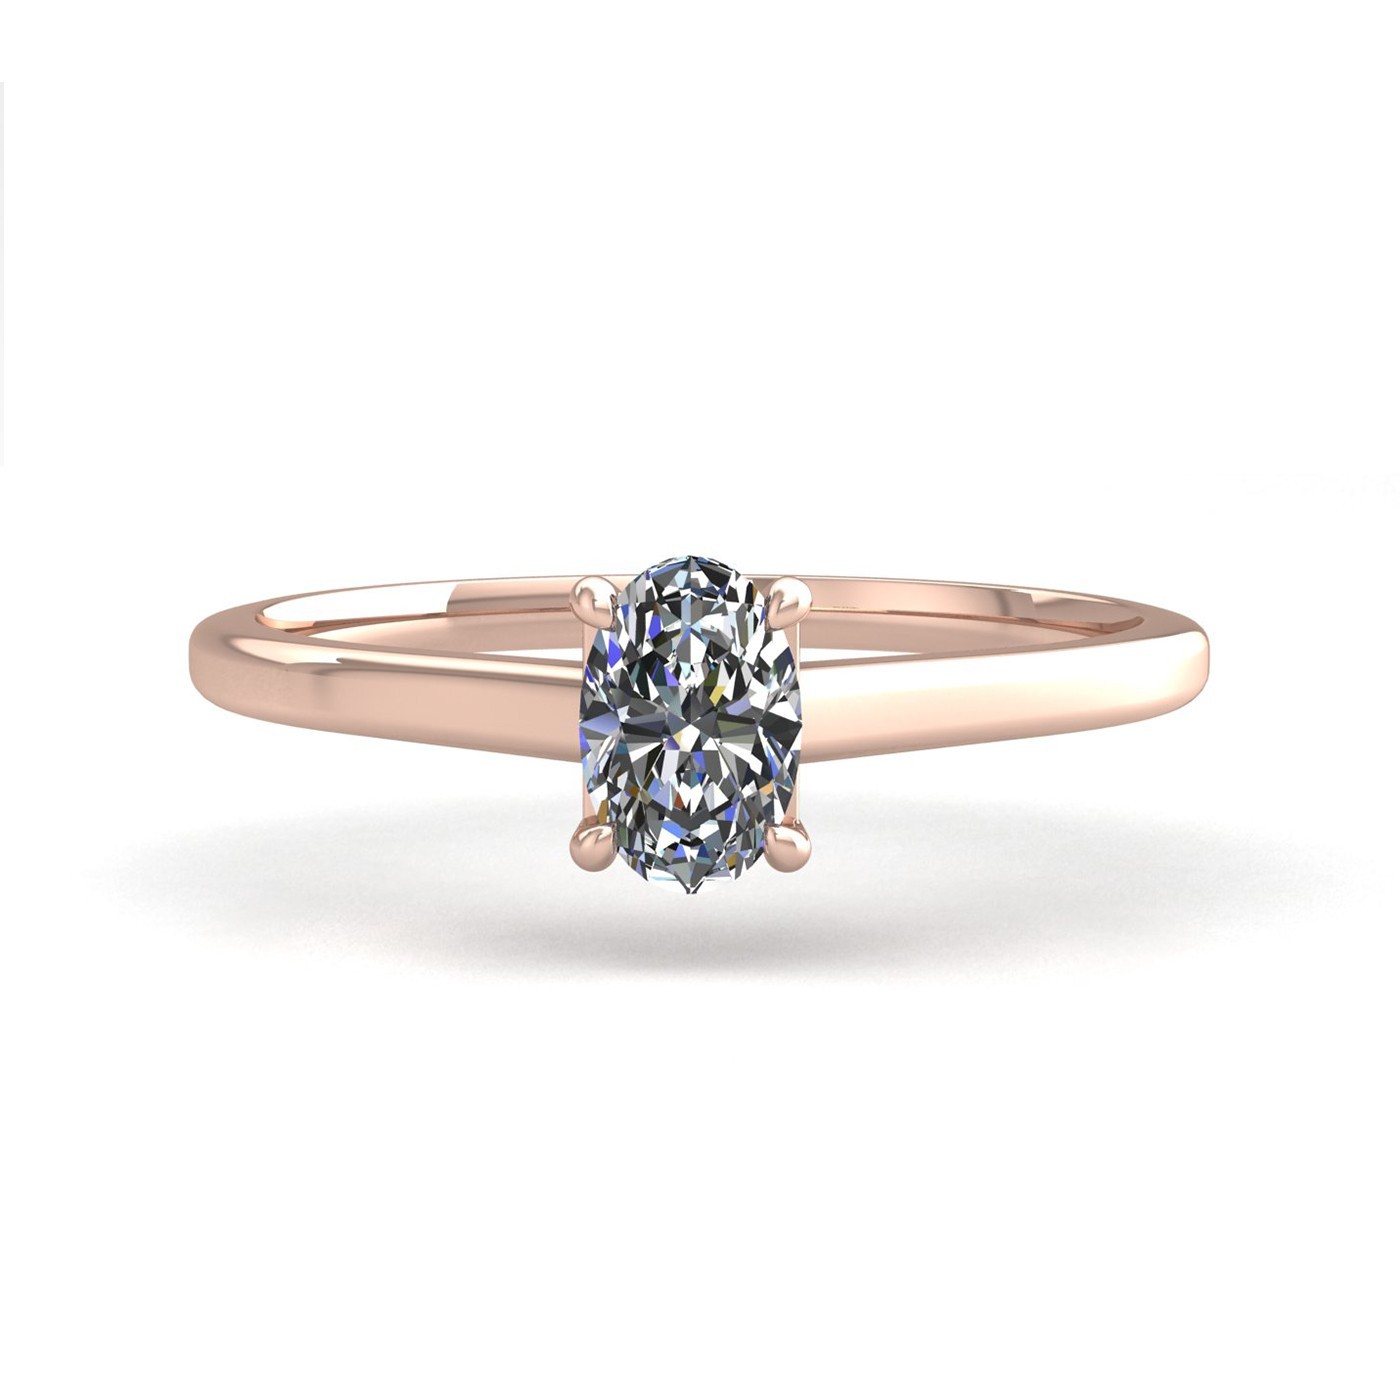 18k rose gold  0,30 ct 4 prongs solitaire oval cut diamond engagement ring with whisper thin band